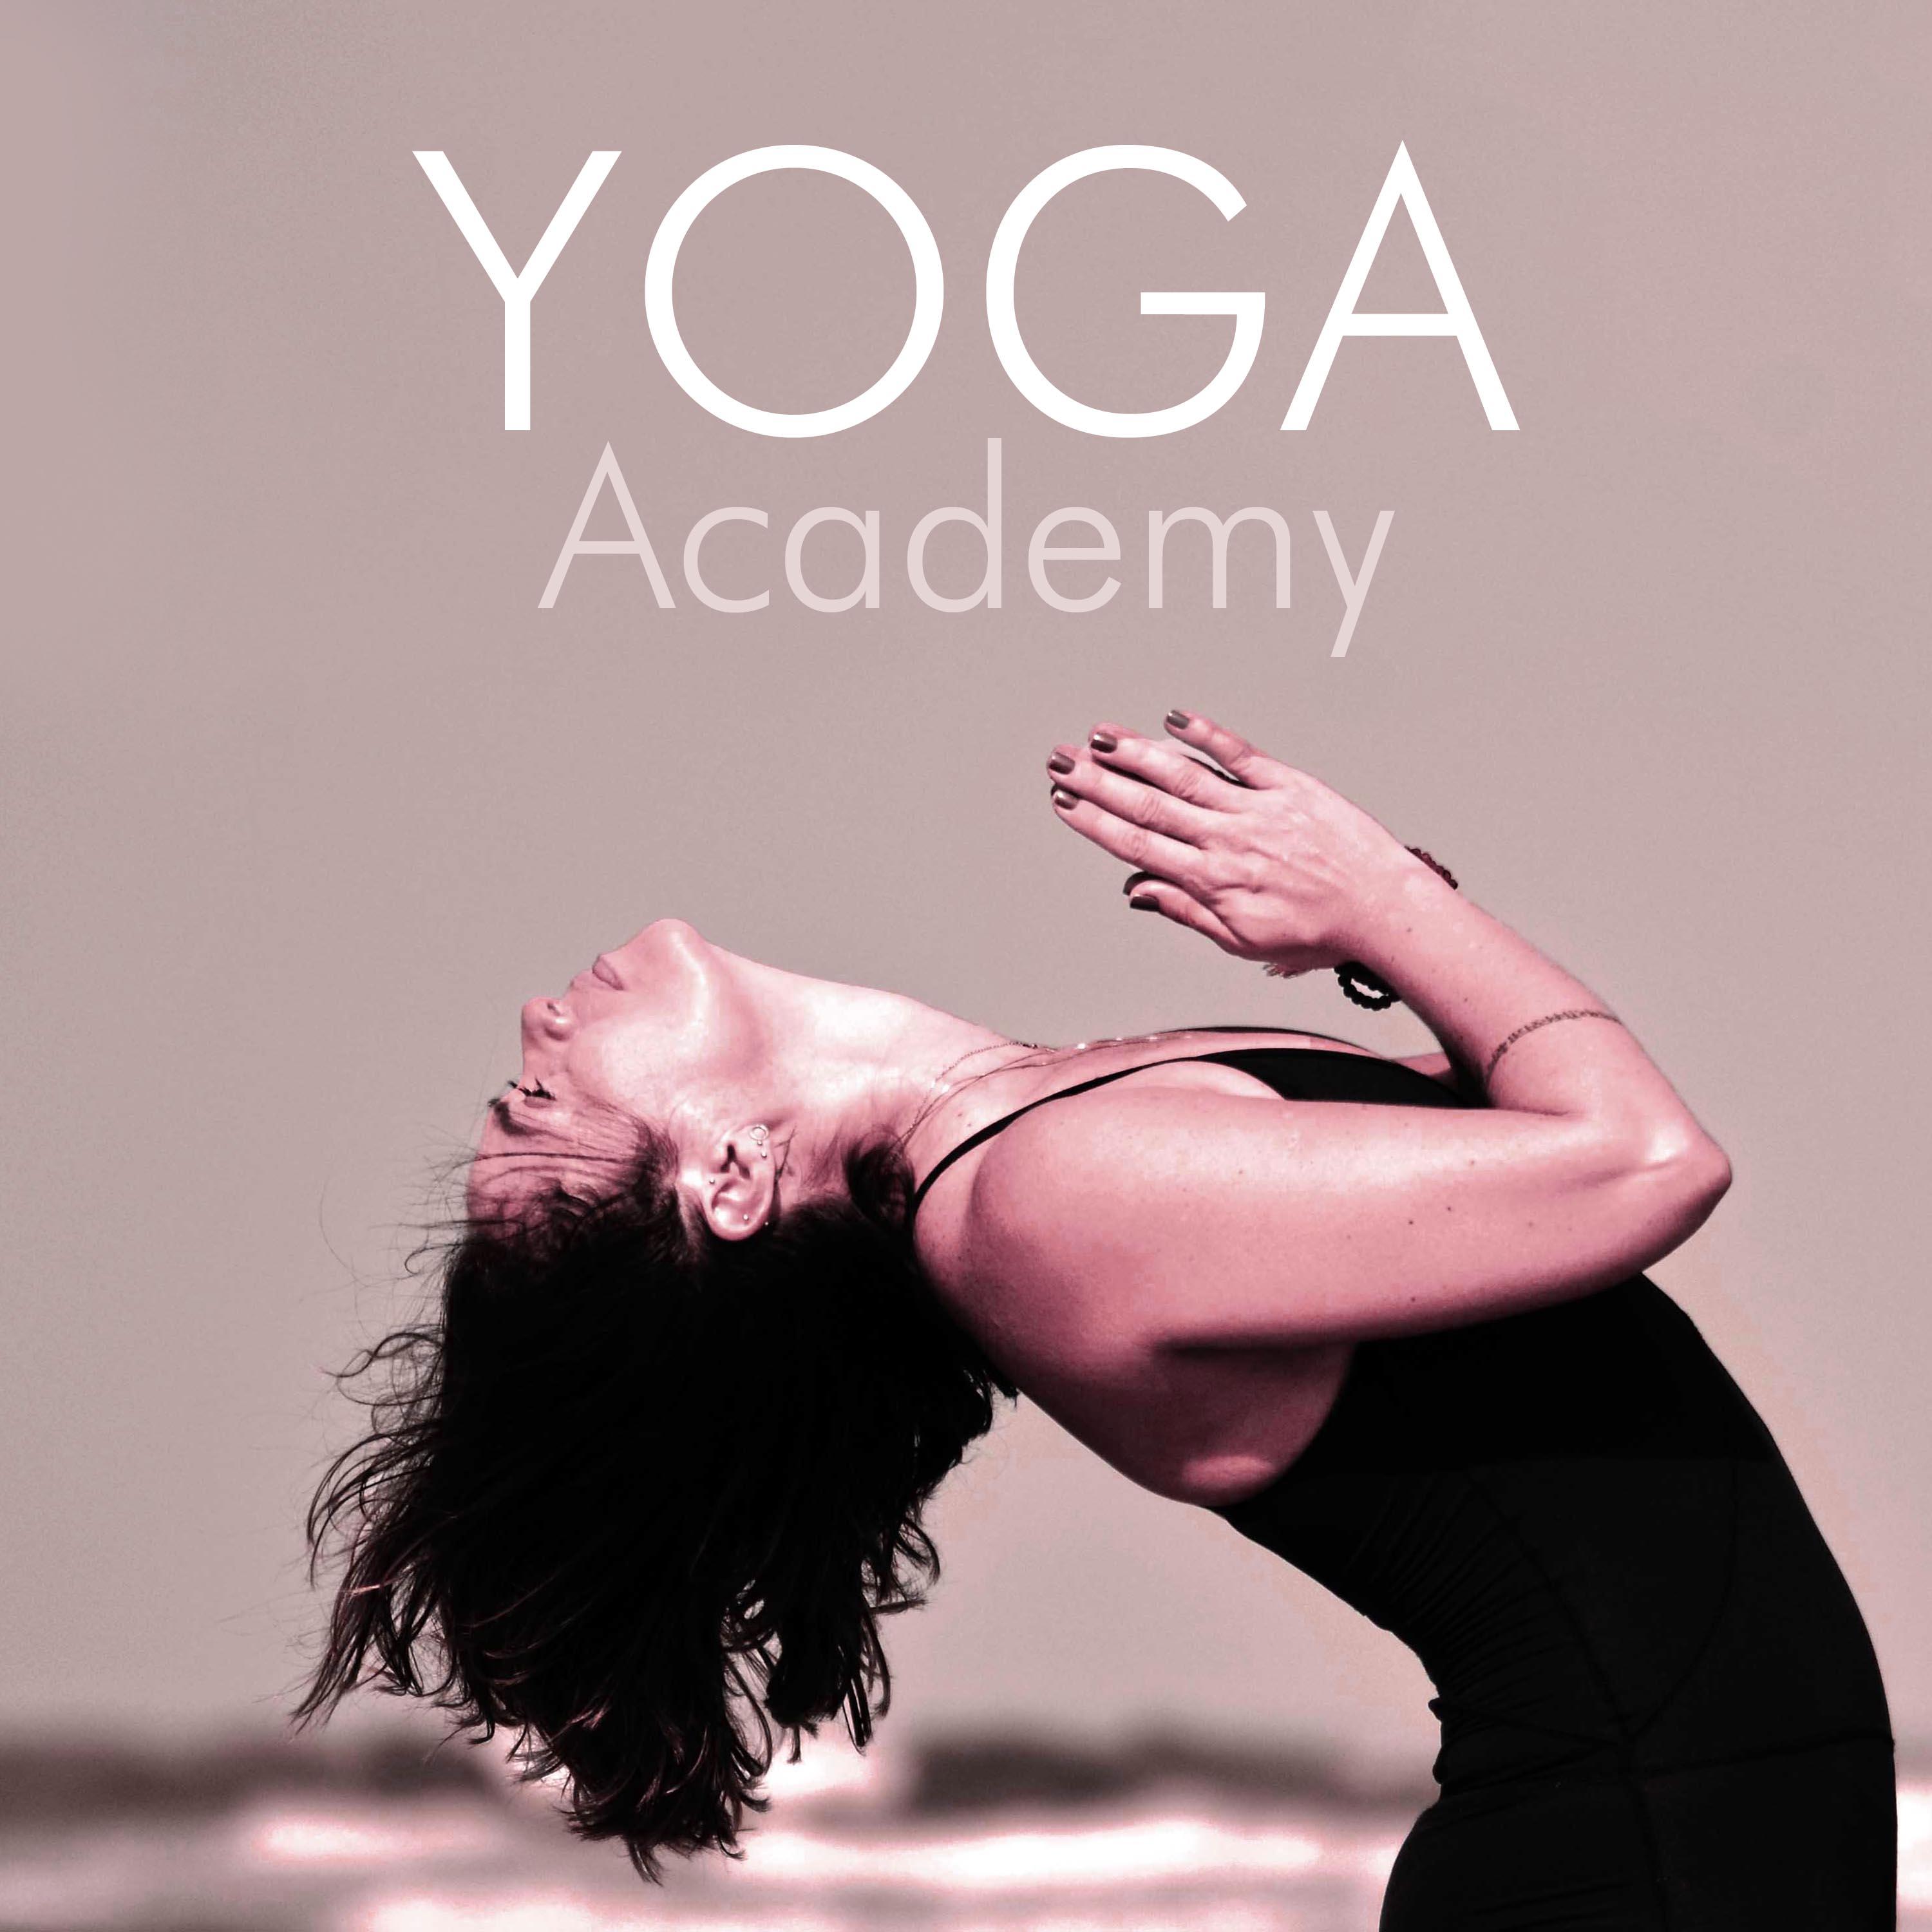 Yoga Academy: The Best Background for Yoga Classes